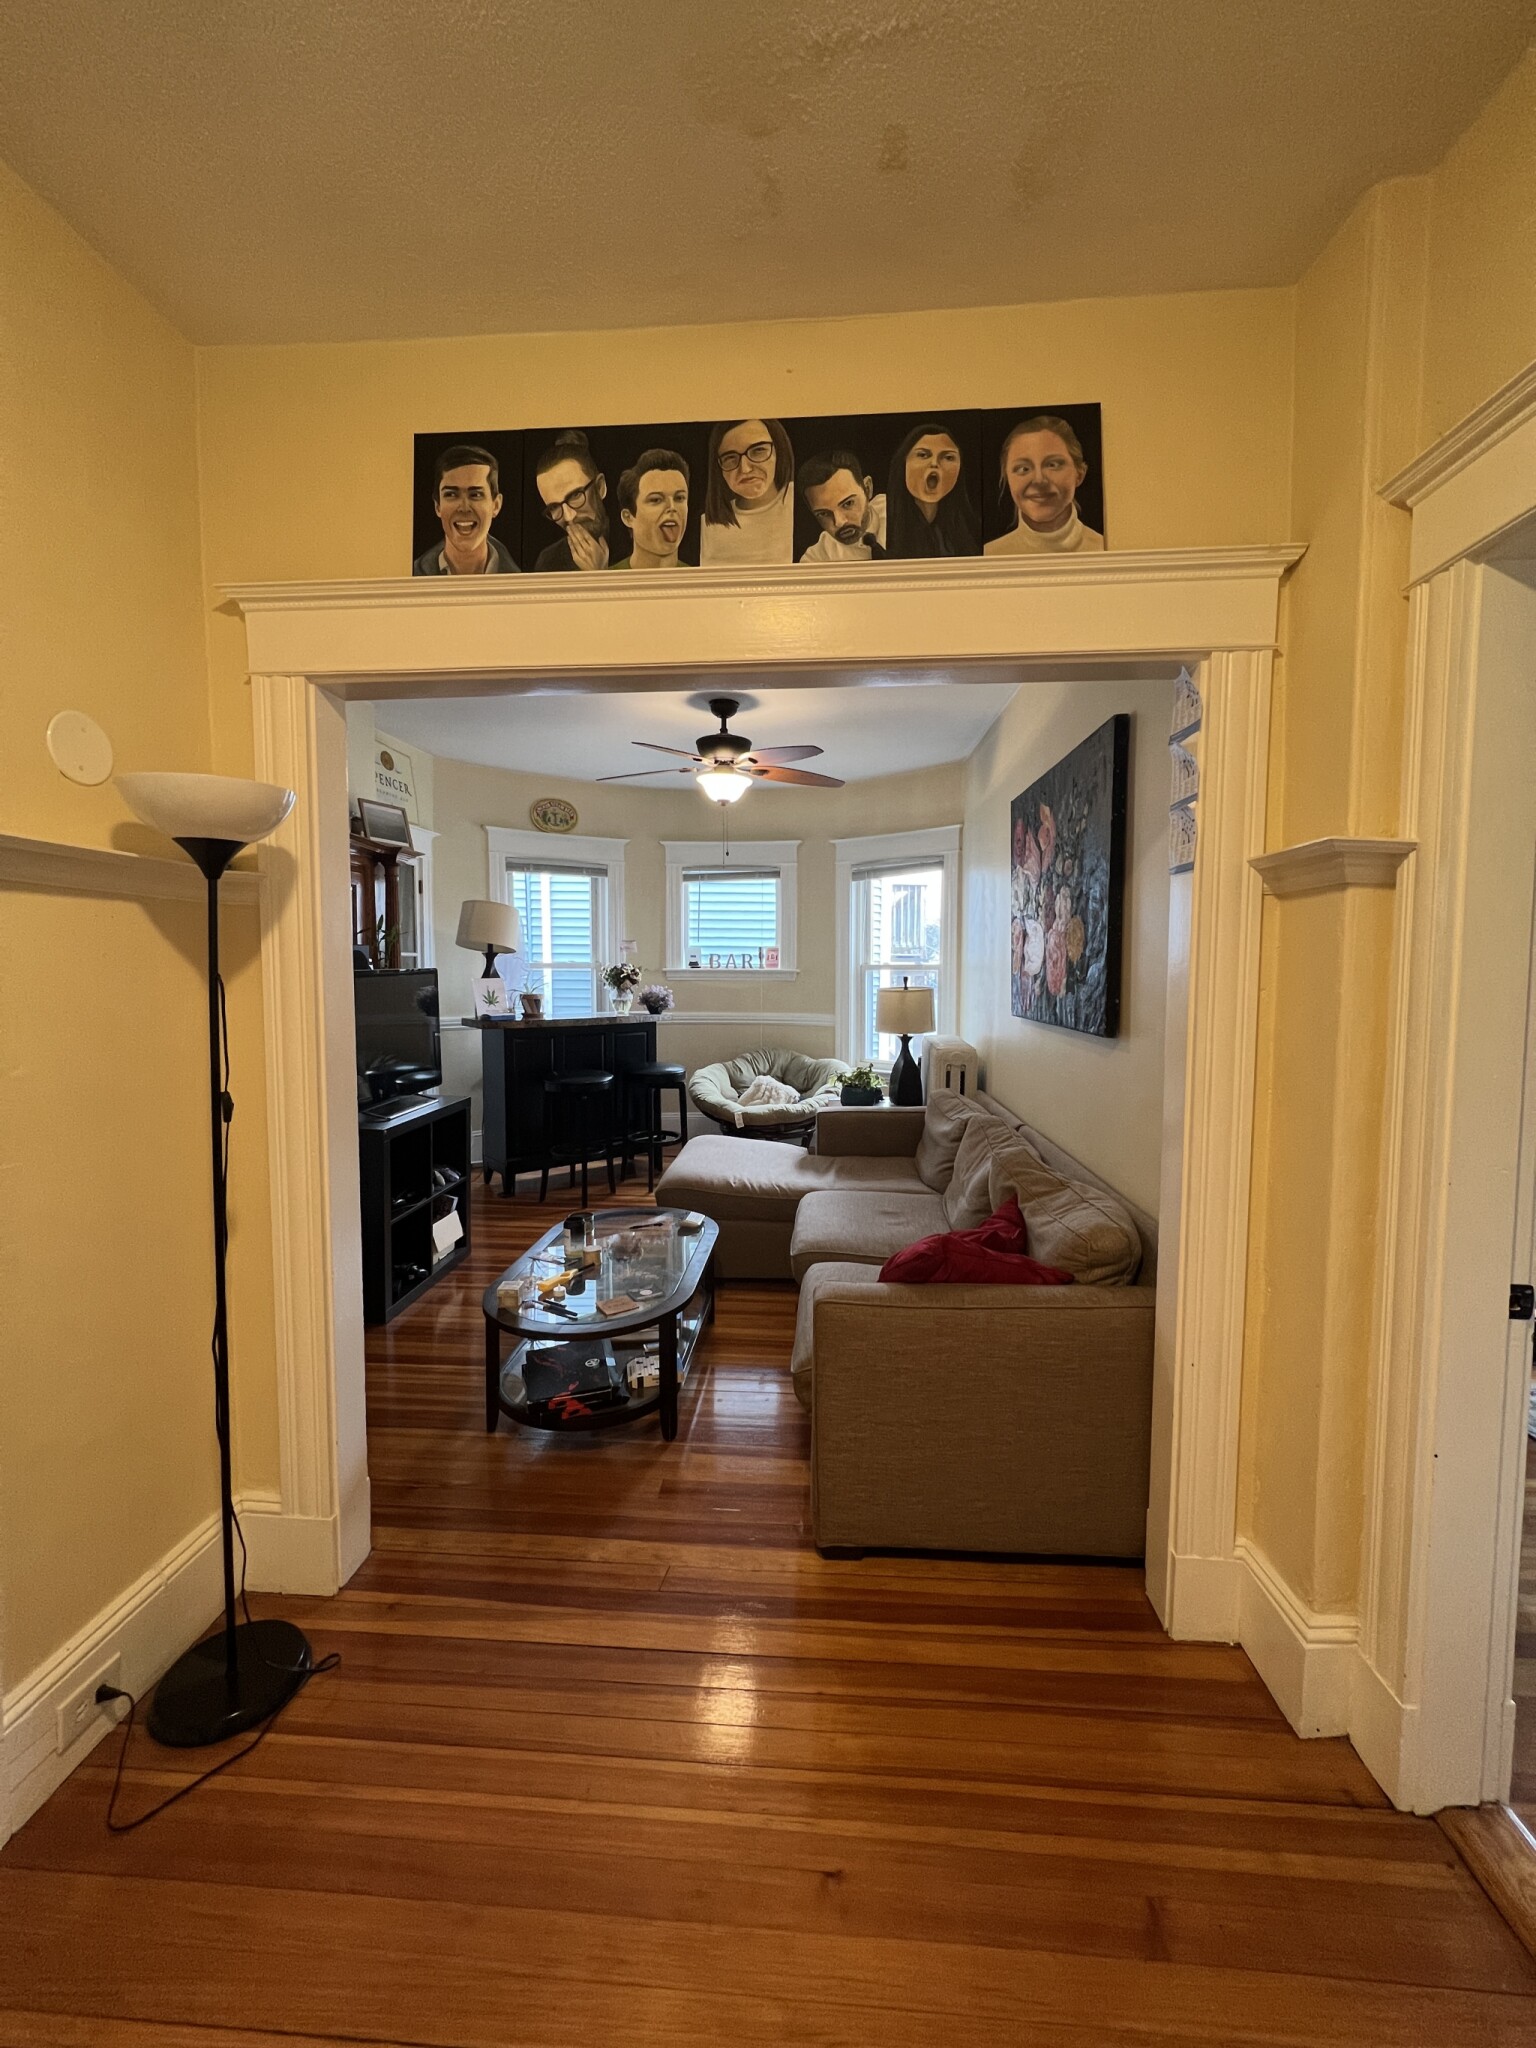 Photos of apartment on Liberty Rd.,Somerville MA 02144